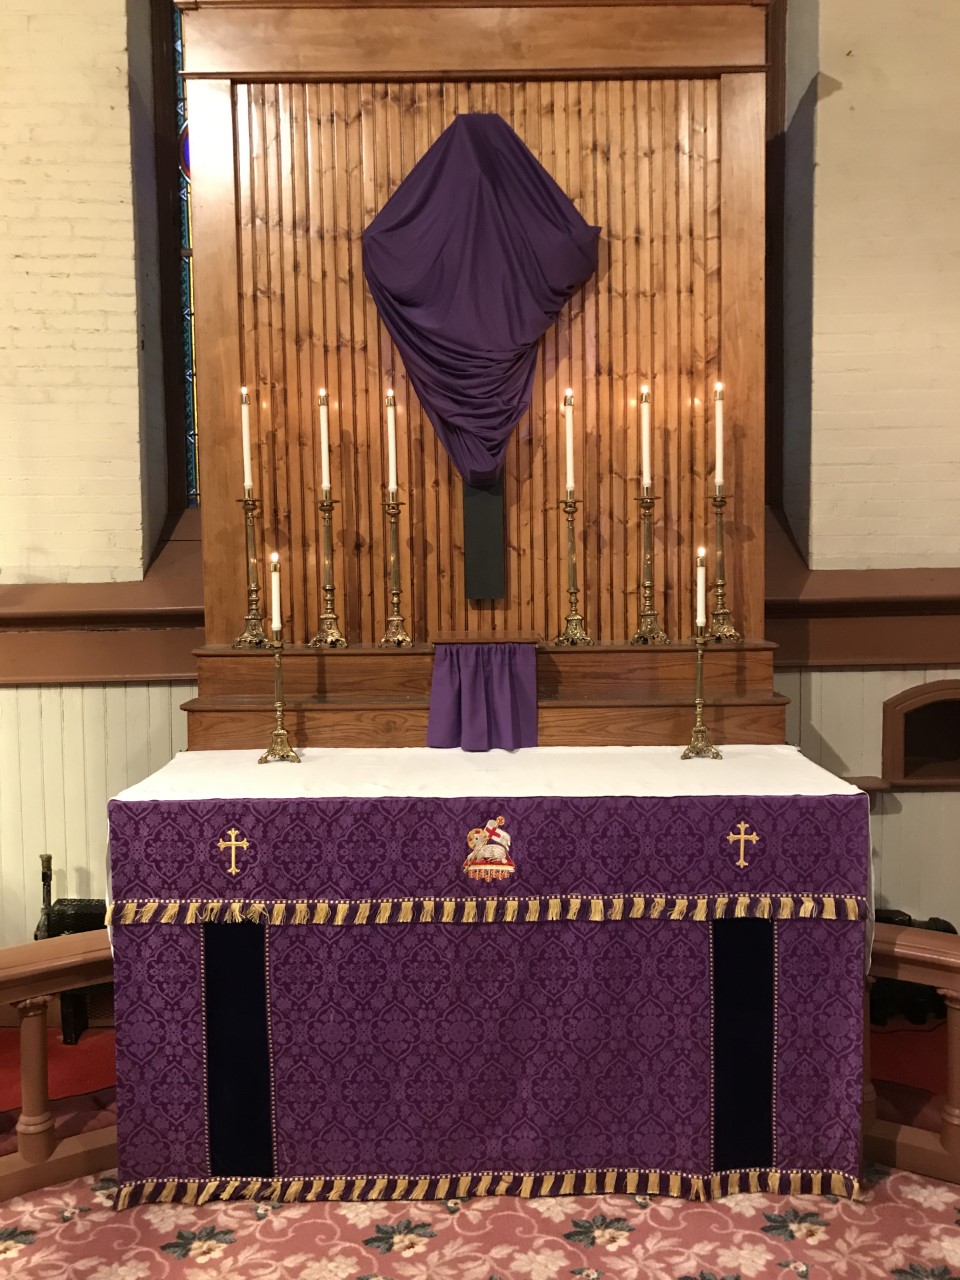 The Altar vested in violet for Passiontide